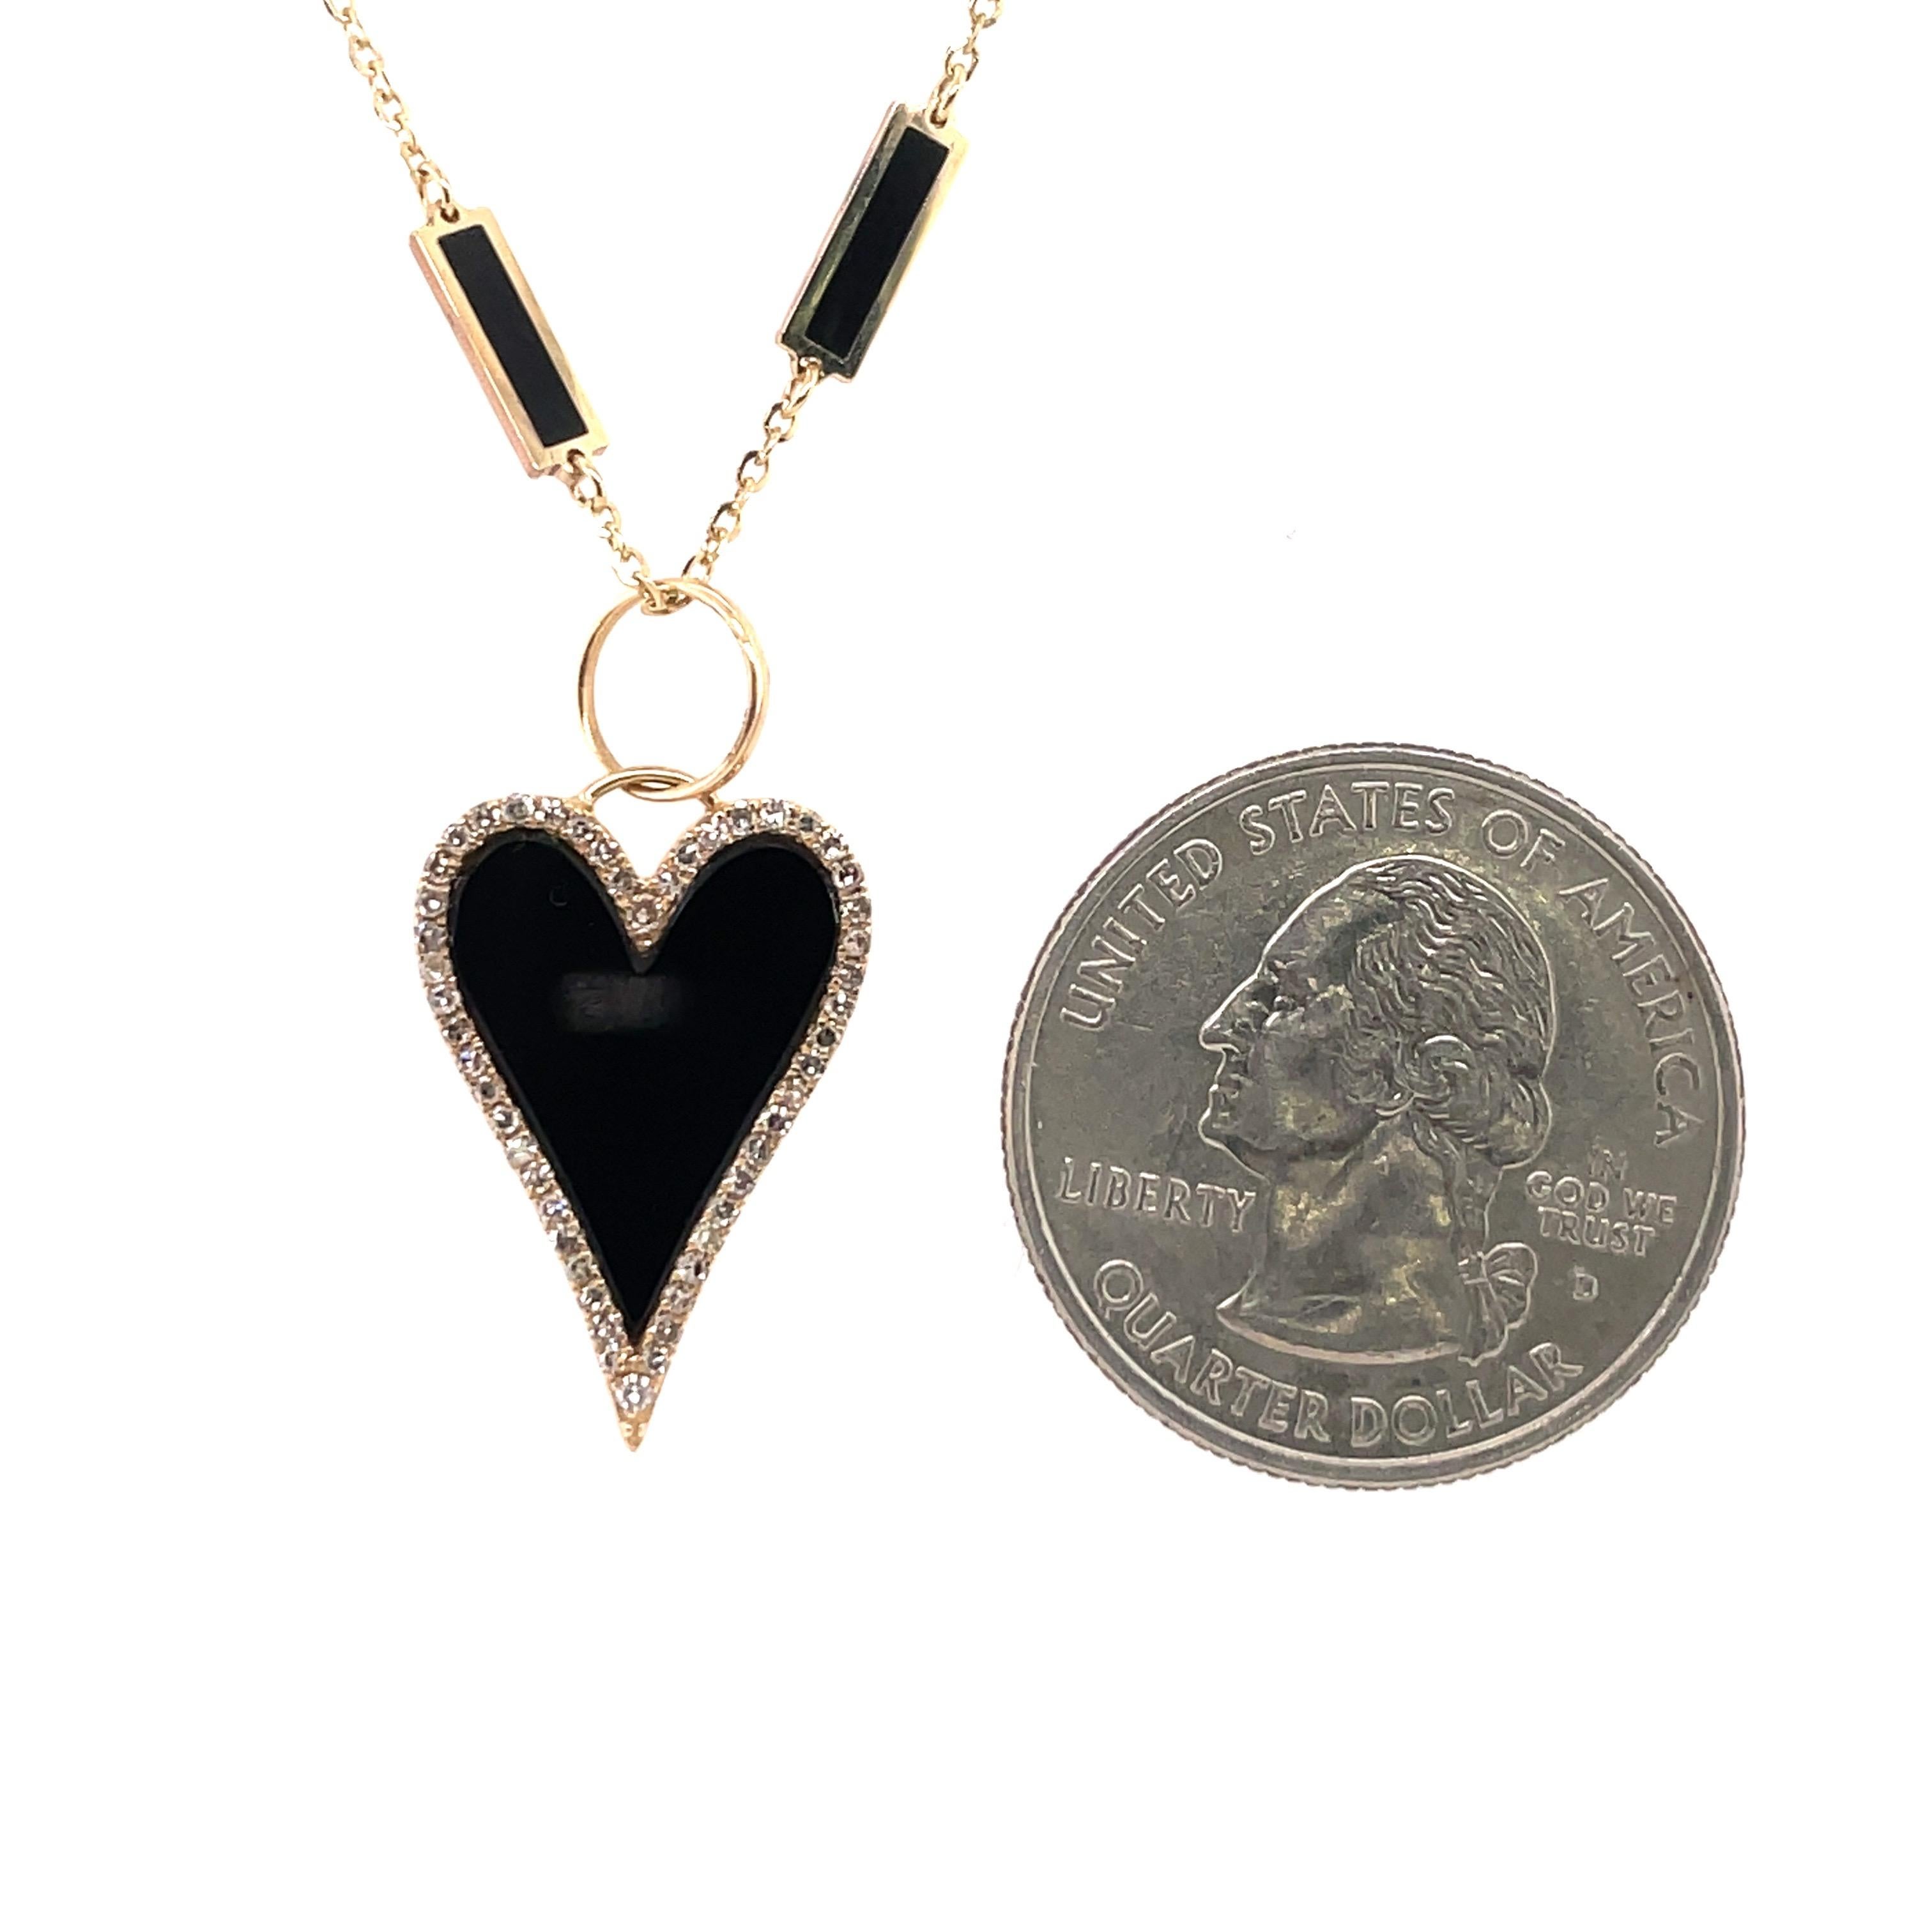 Italian 14K Yellow gold necklace featuring on diamond onyx and gold heart pendant on a onyx and gold trim chain. 
Can mix and match pendant/necklace. 
Heart comes in different colors. 
Paperclip necklaces are available and more fashion